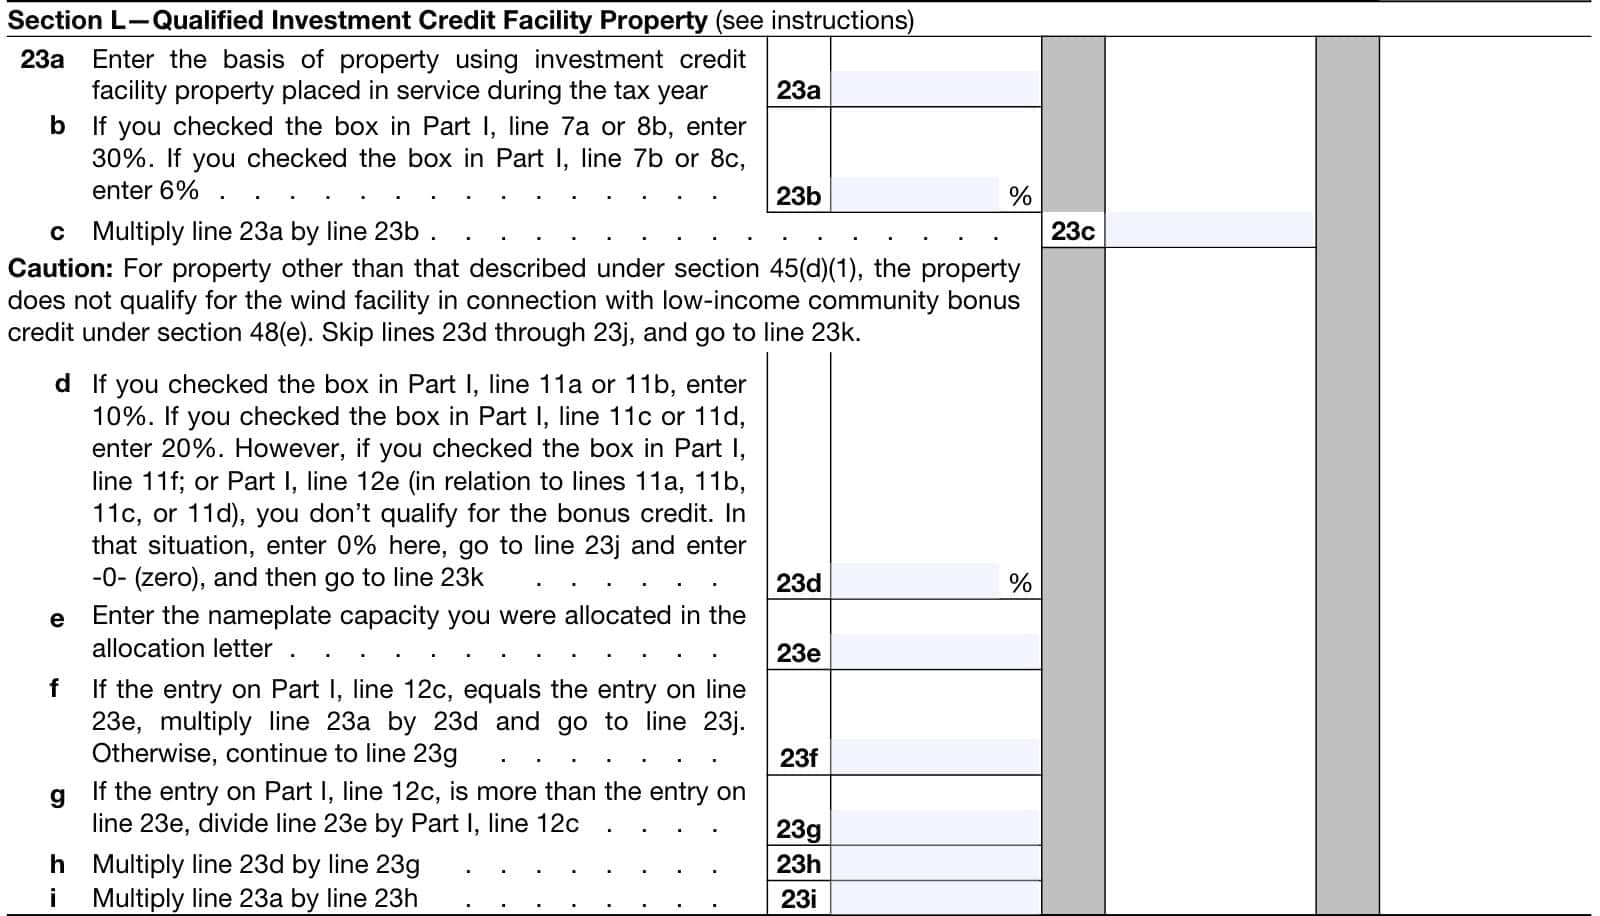 irs form 3468, part vi, section l: qualified investment credit facility property